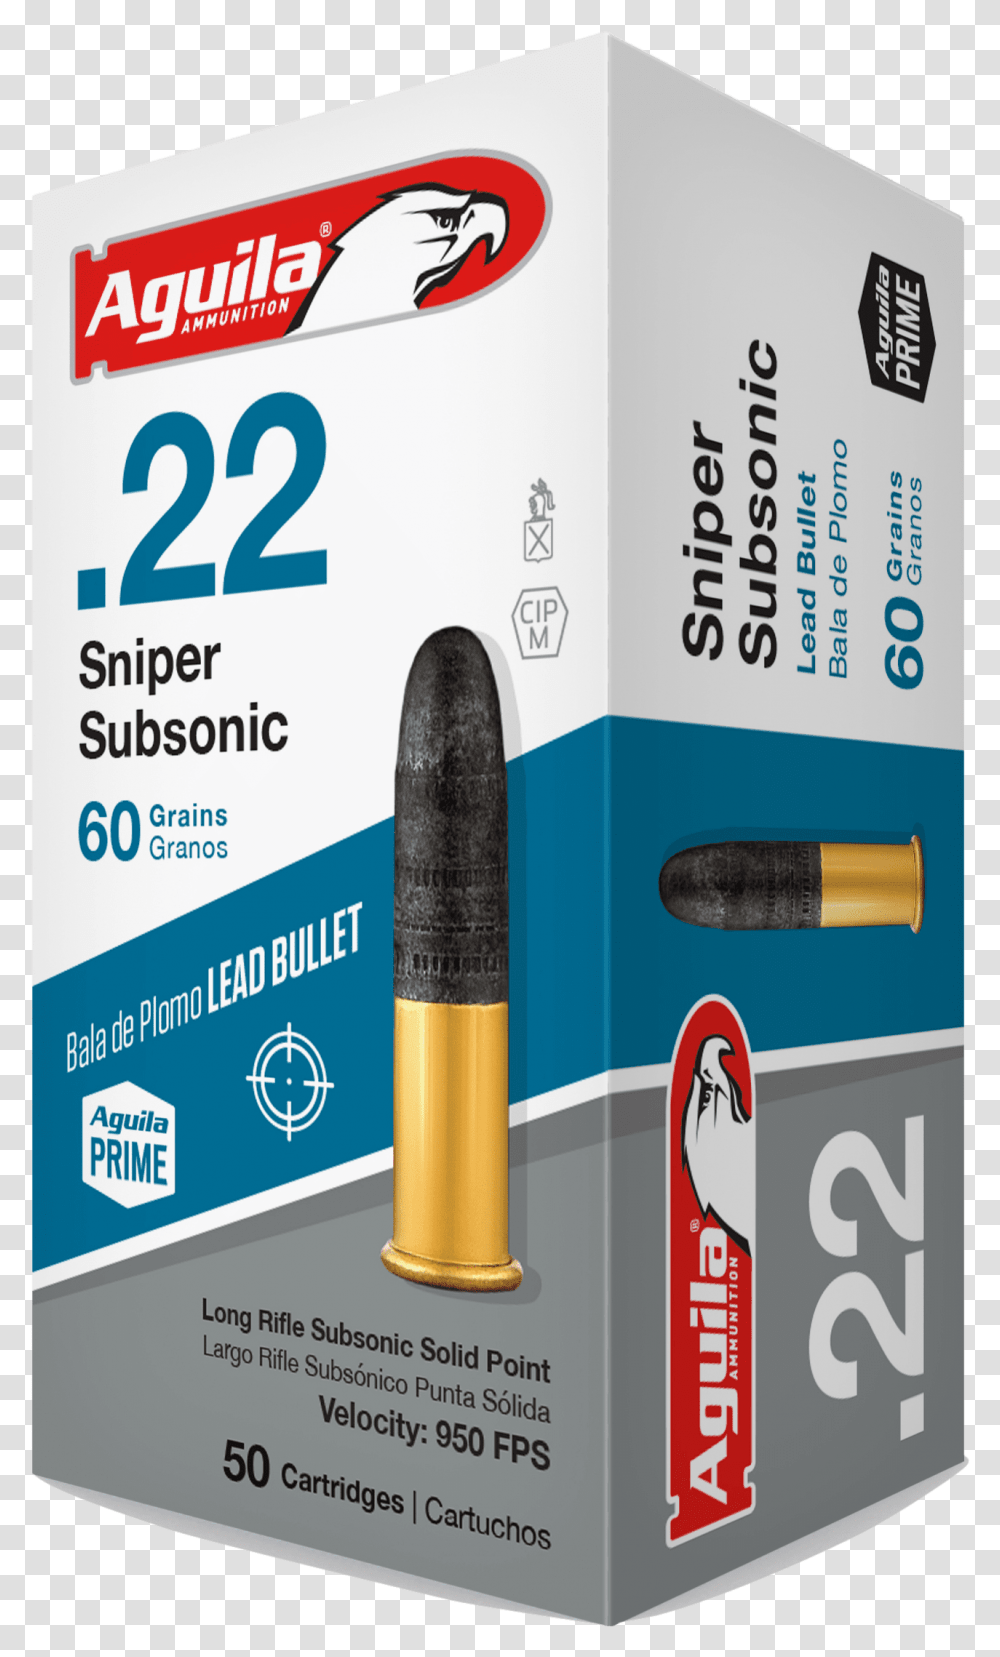 Aguila 22 Sniper Subsonic, Weapon, Weaponry, Ammunition, Bullet Transparent Png